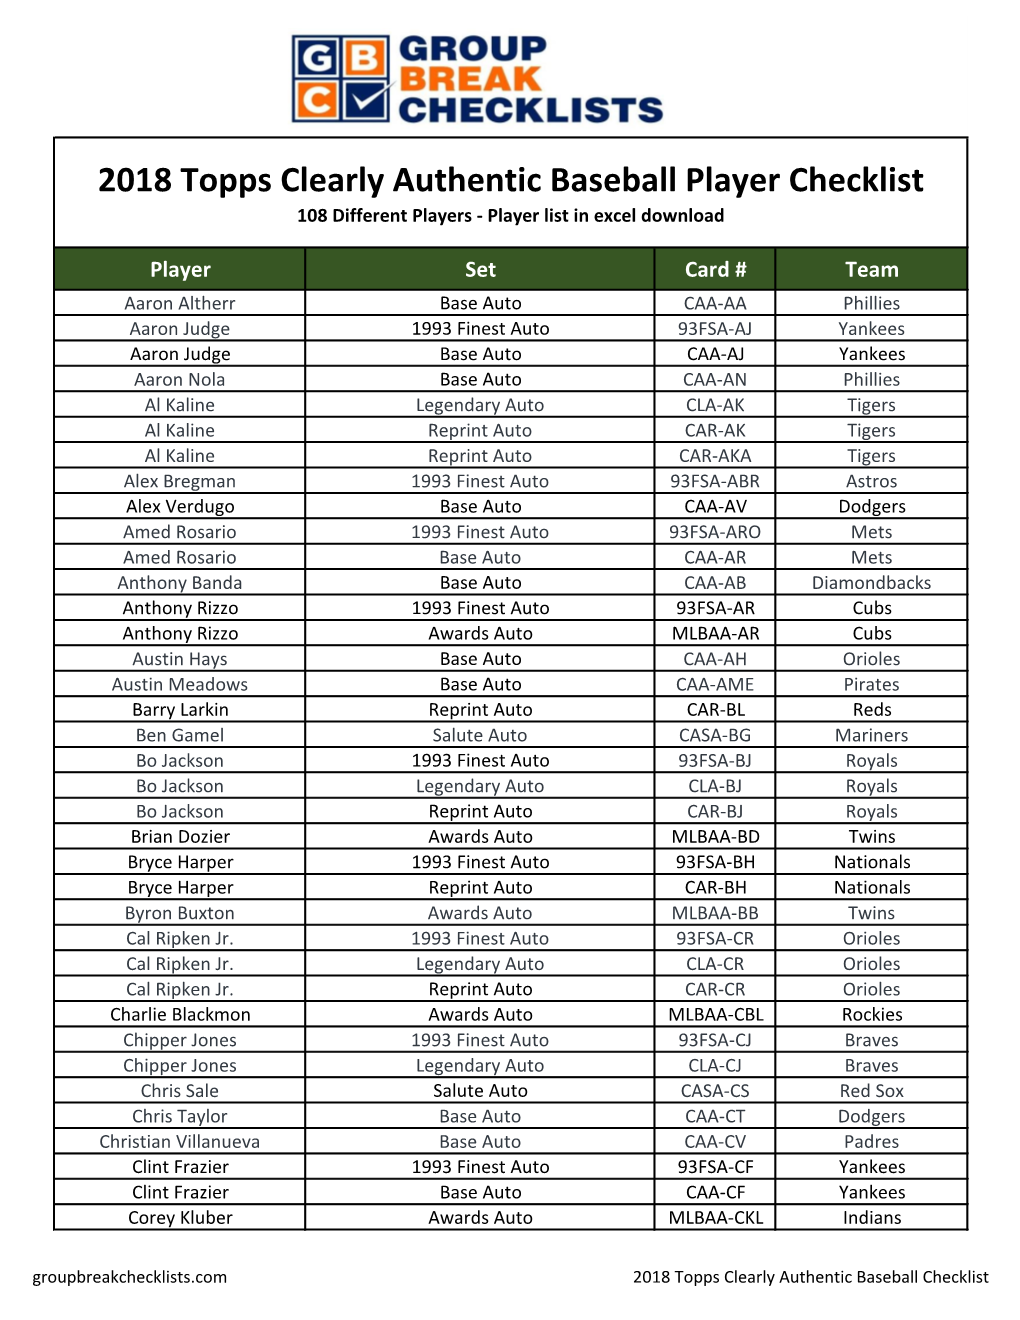 2018 Topps Clearly Authentic Baseball Checklist